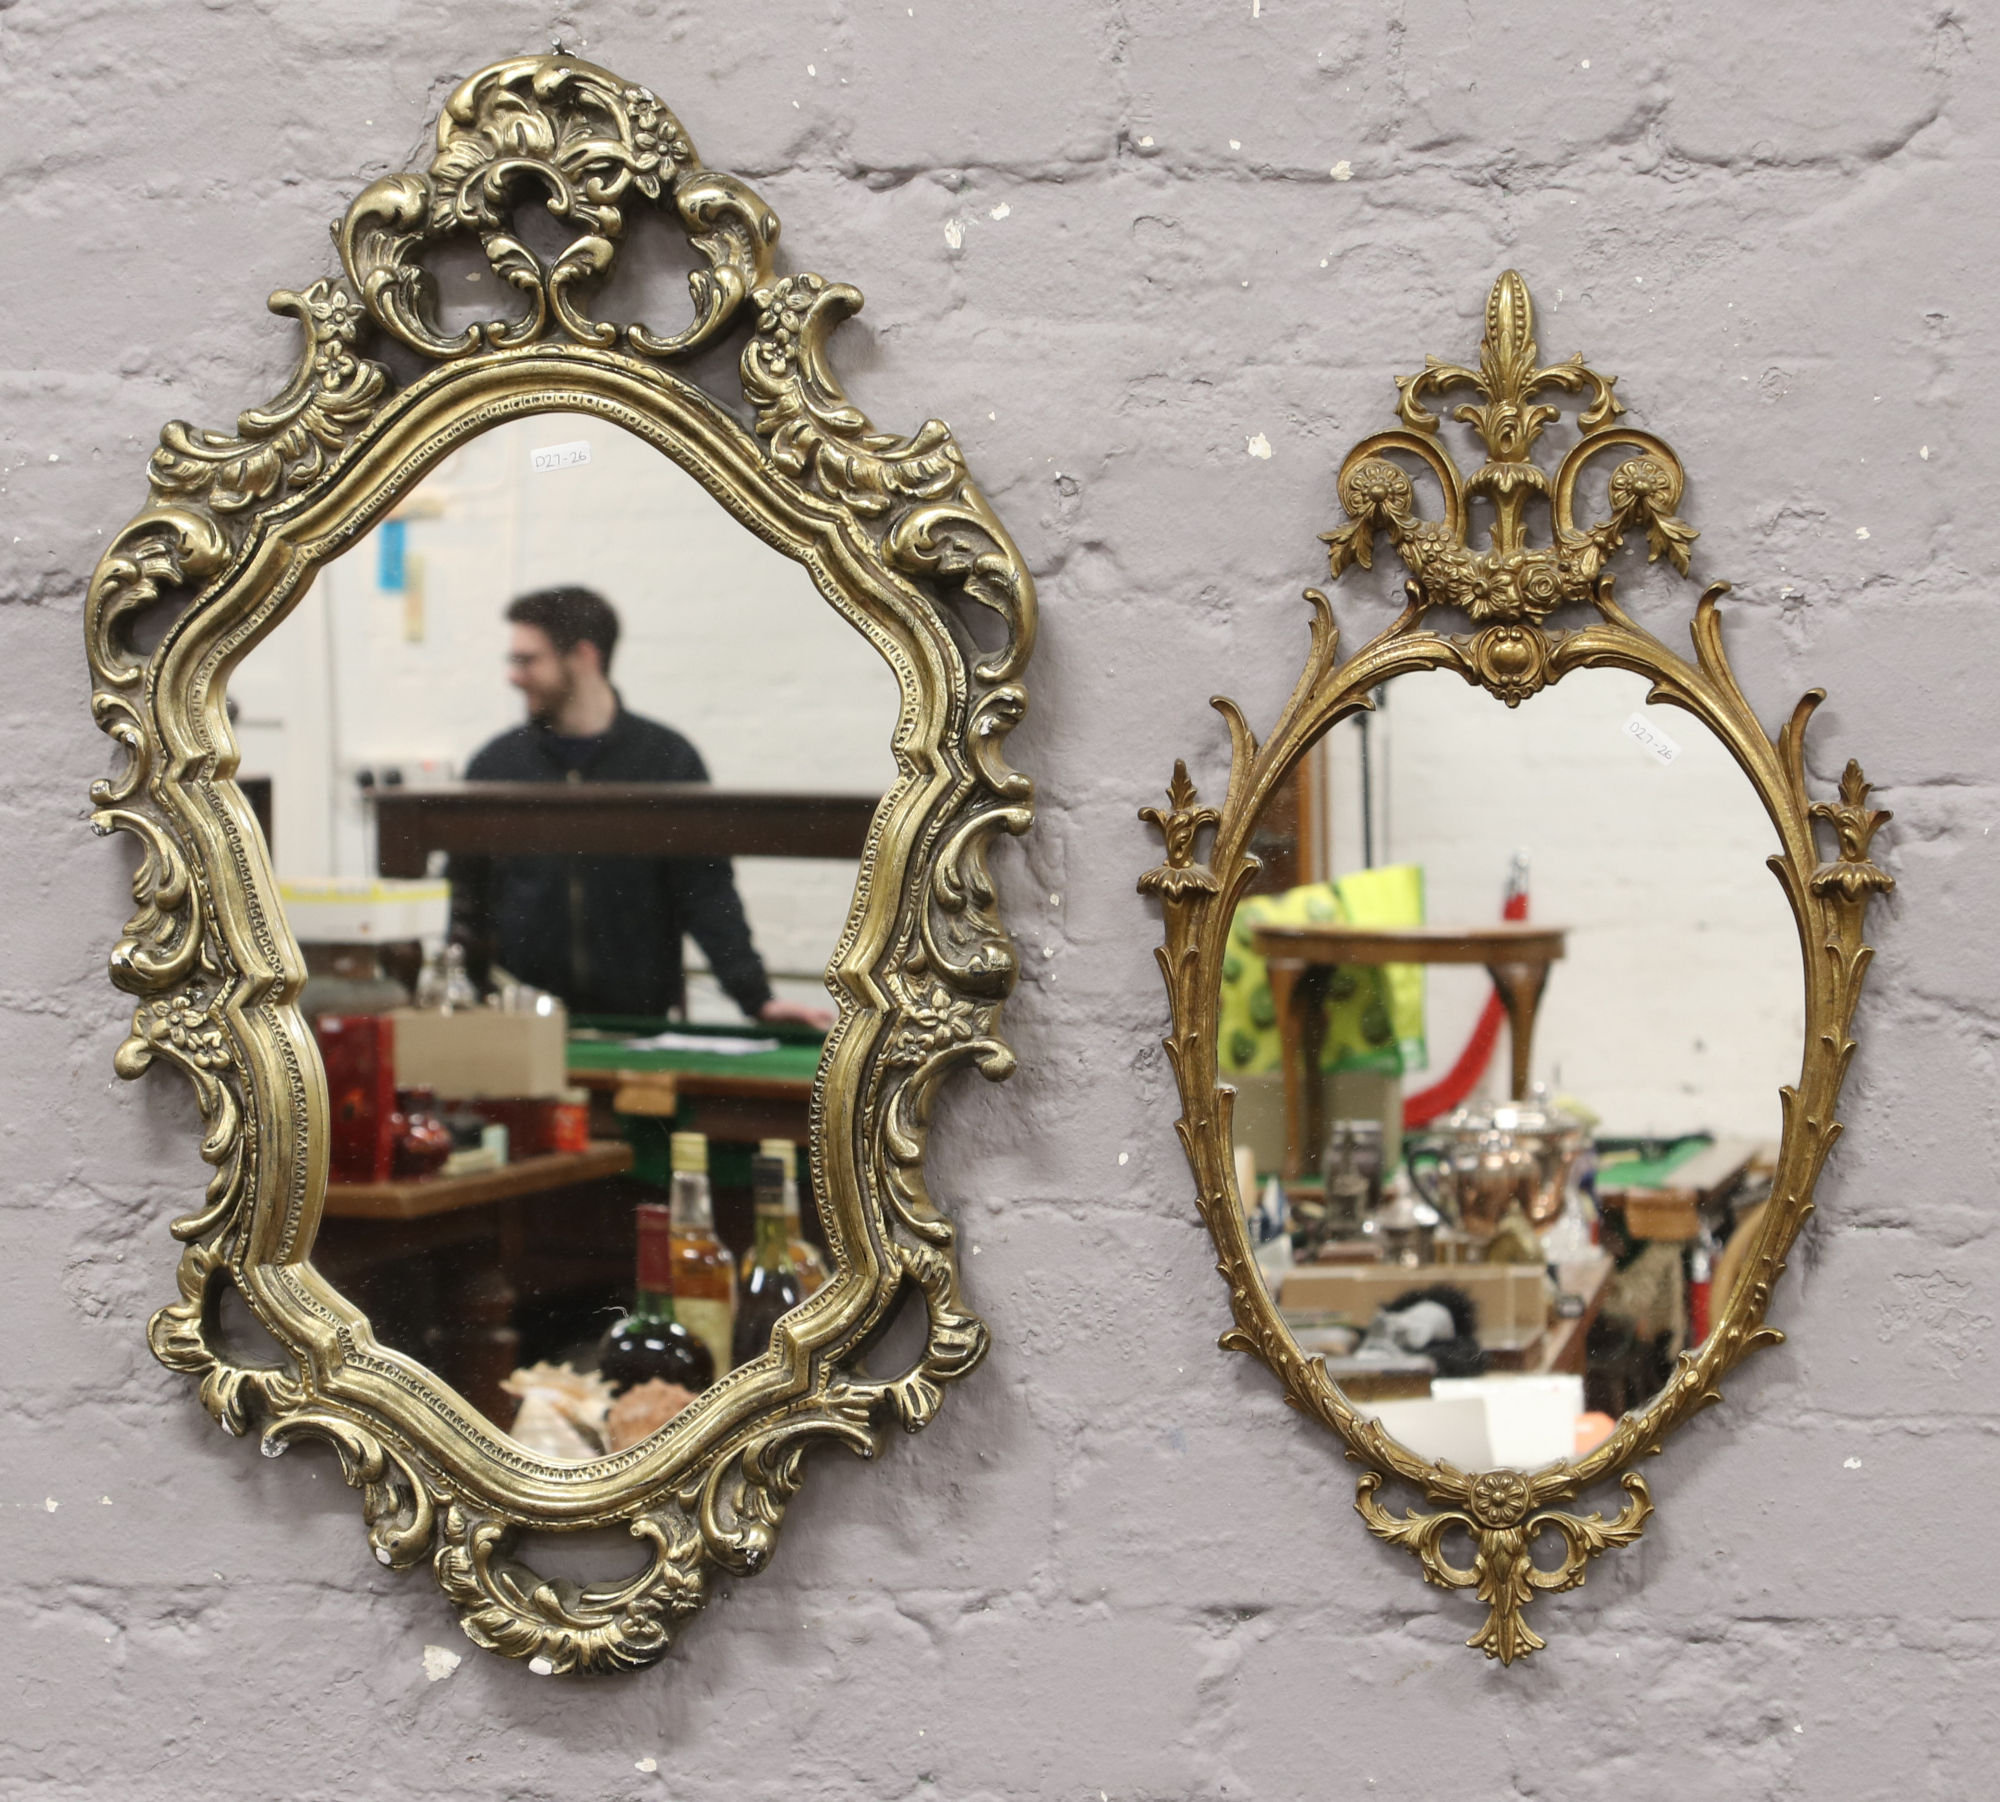 Two ornate gilt framed wall mirrors.